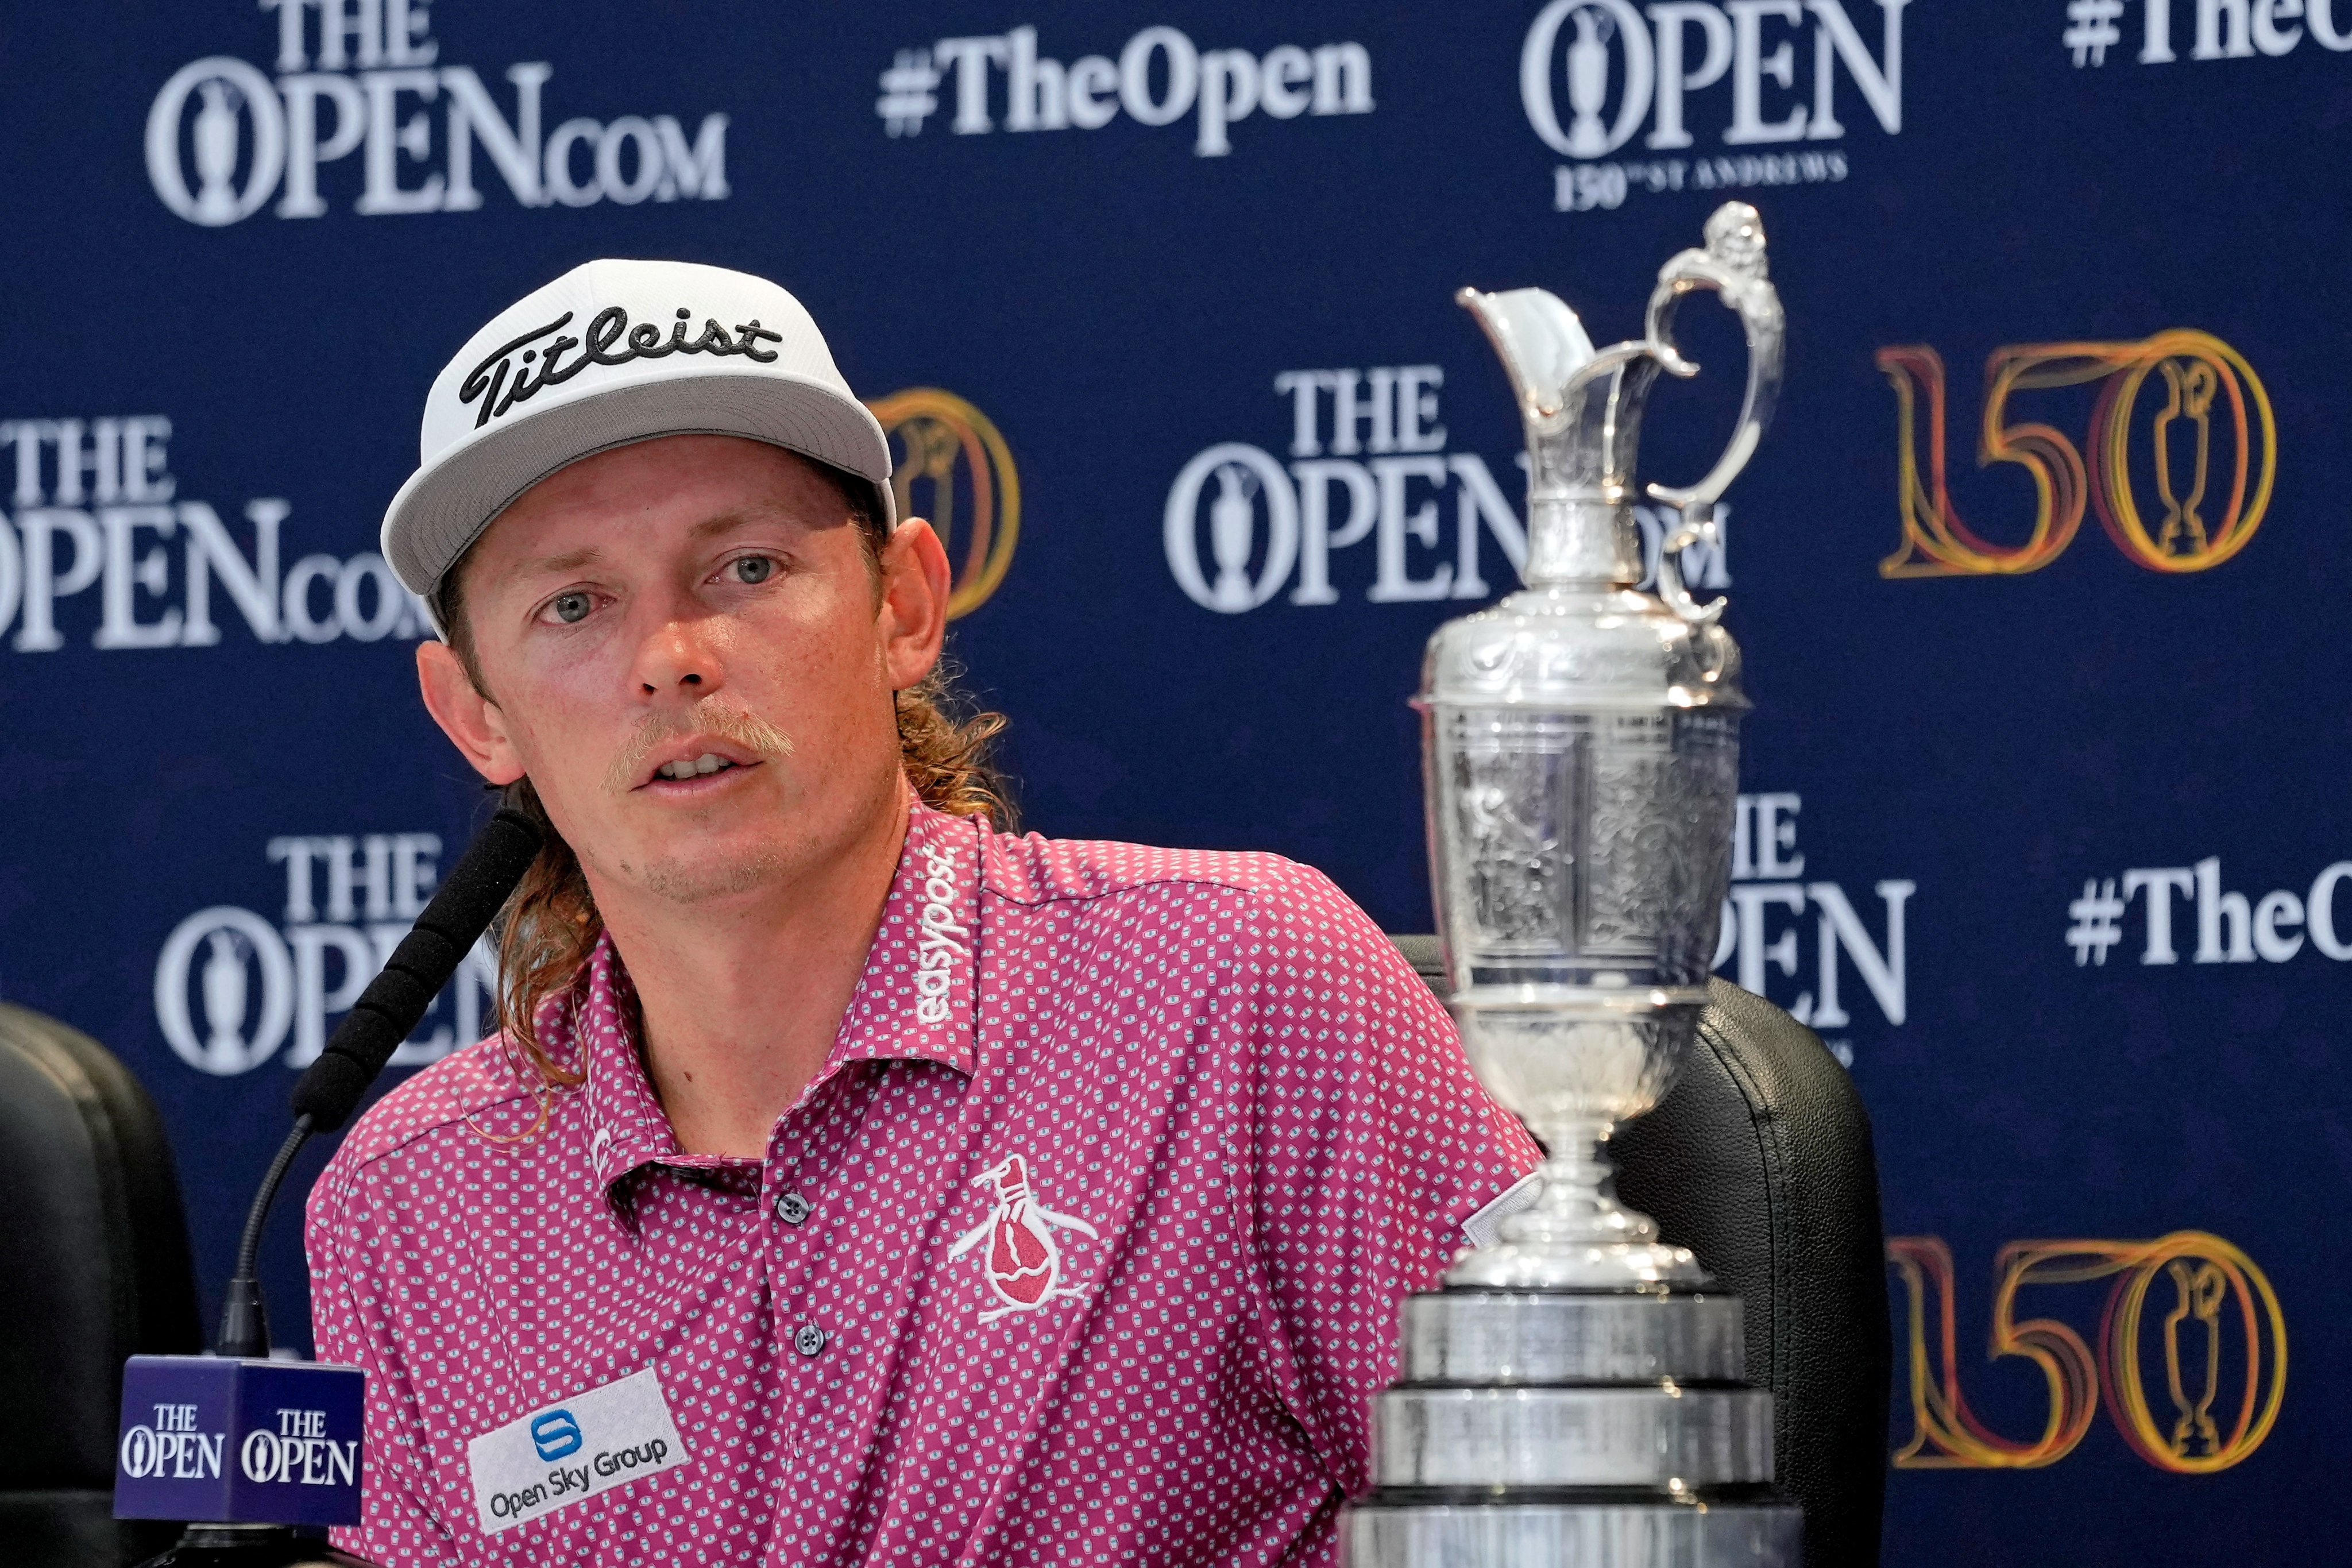 Cameron Smith talks to the media during a press conference after winning the 150th Open Championship. Photo: USA TODAY Sports